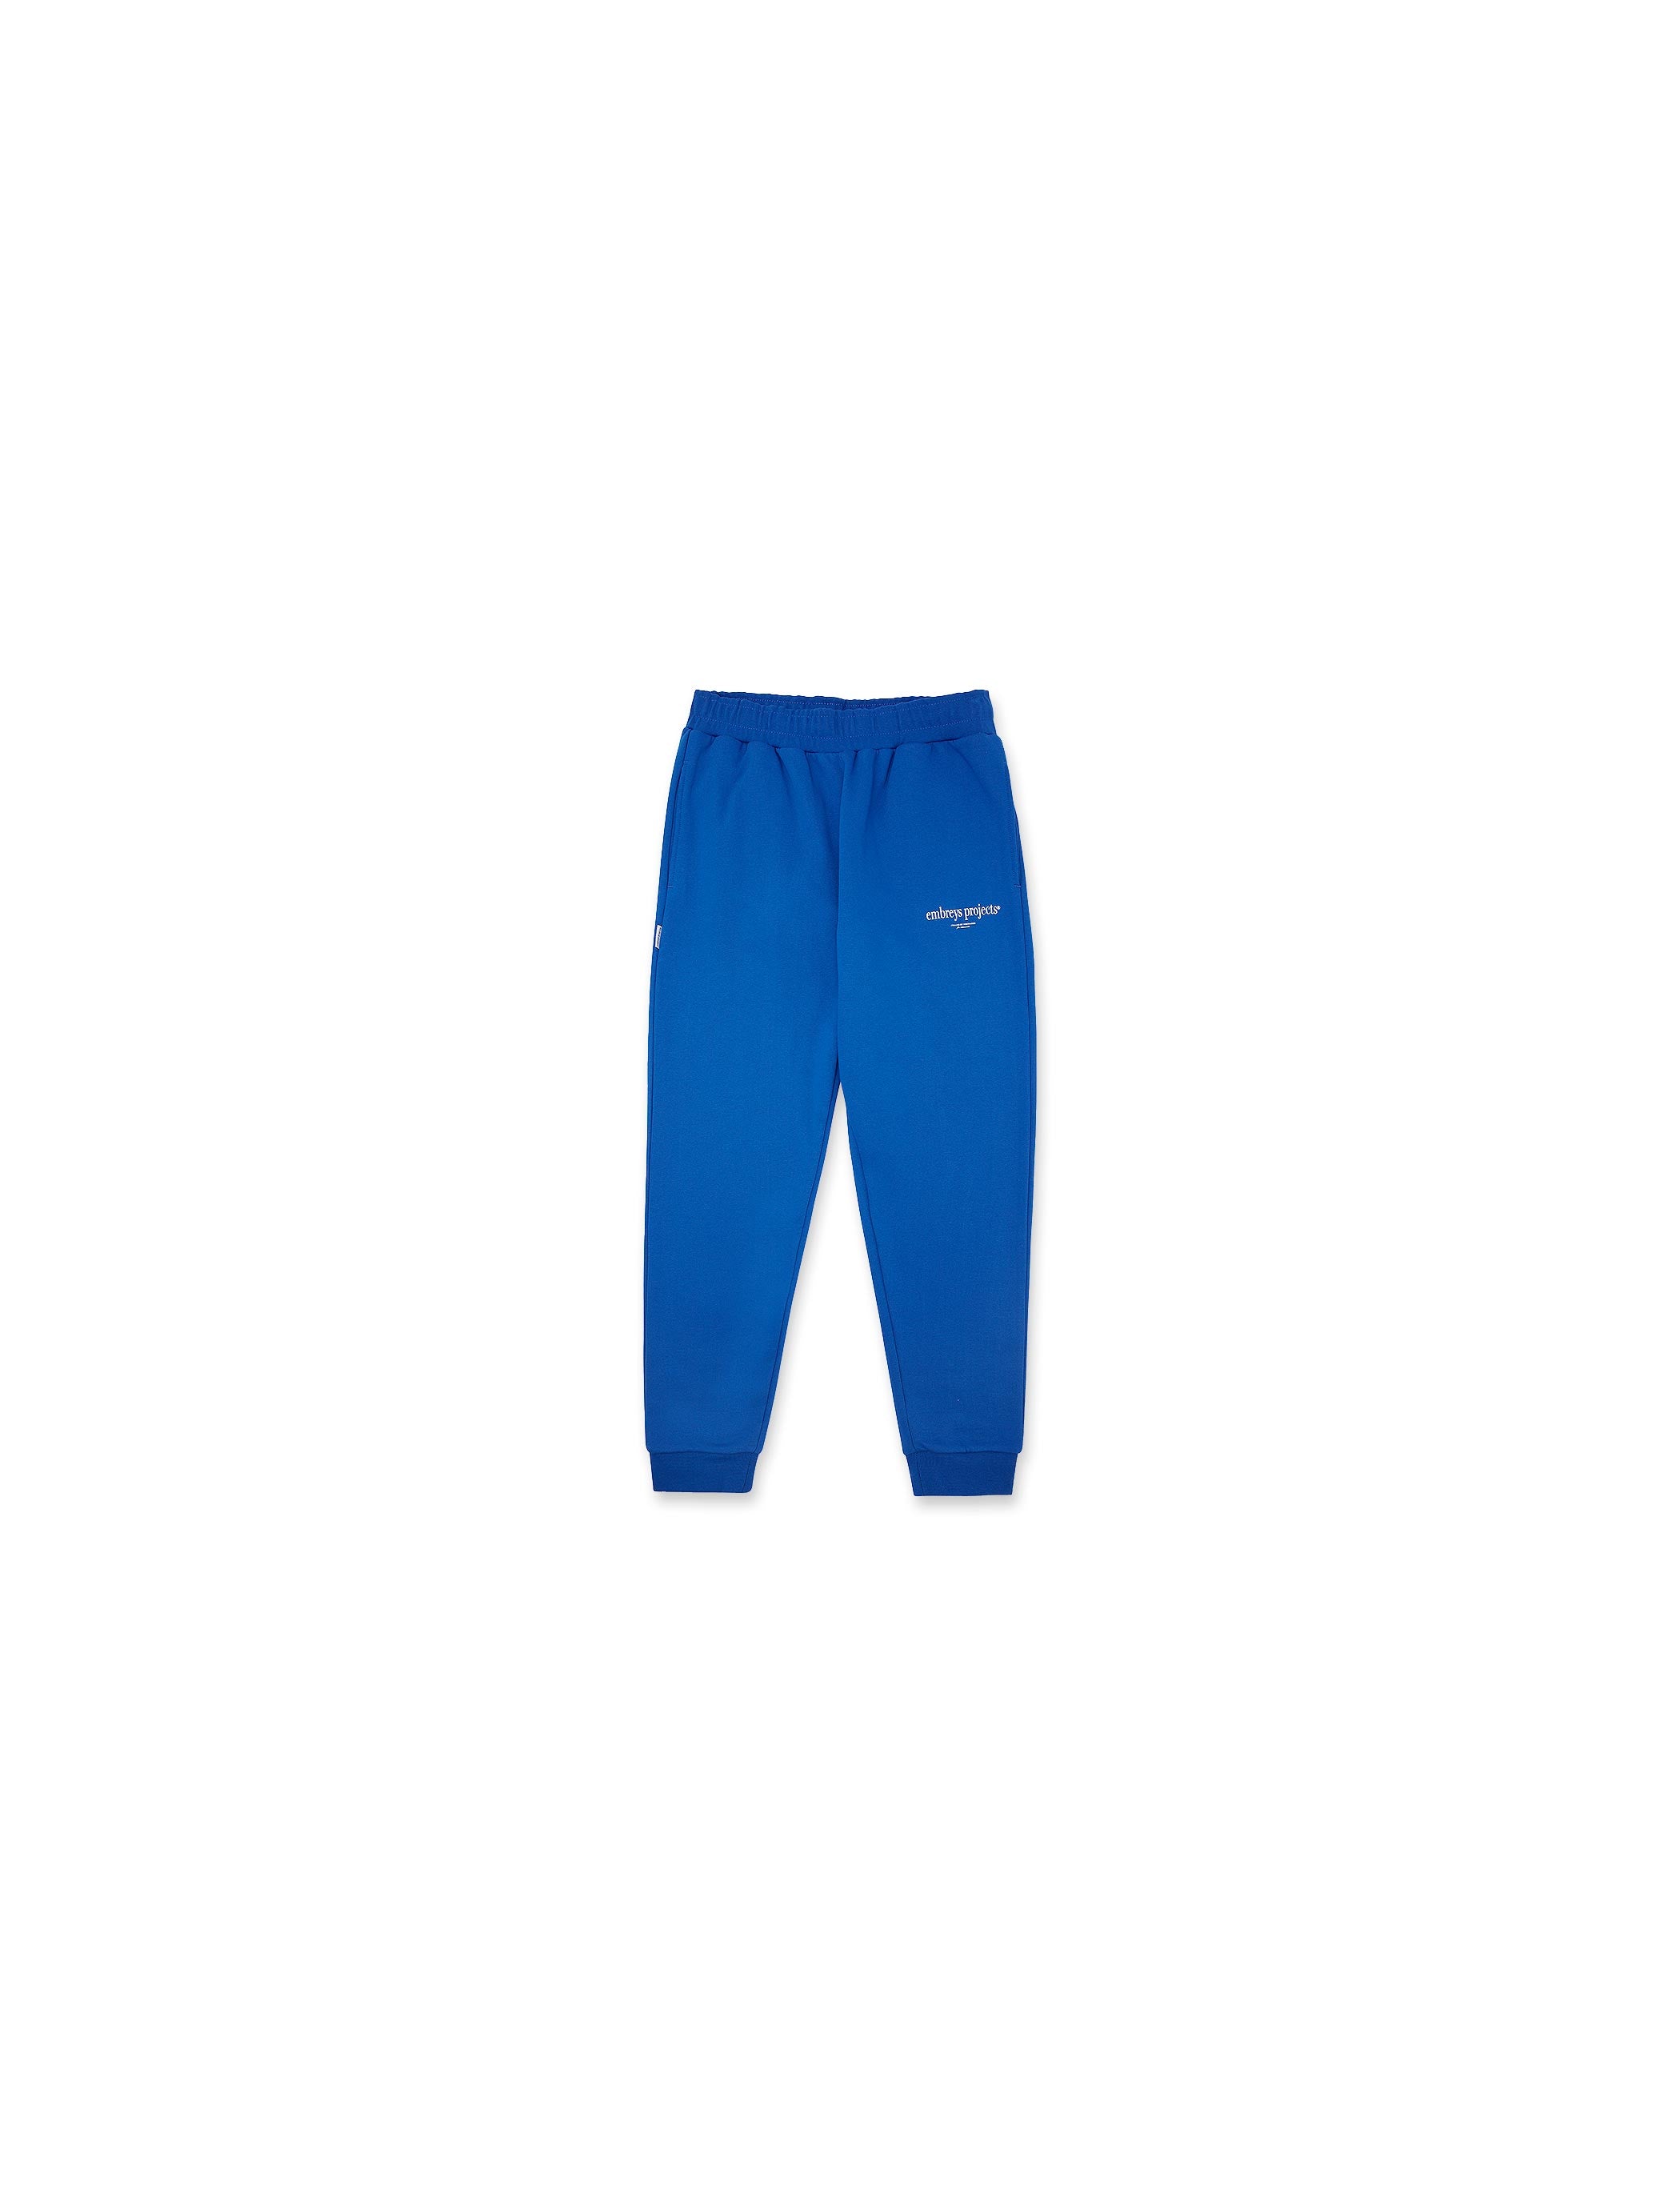 FEEL JOGGER - BLUE LOLITE (W) - Embreys Projects